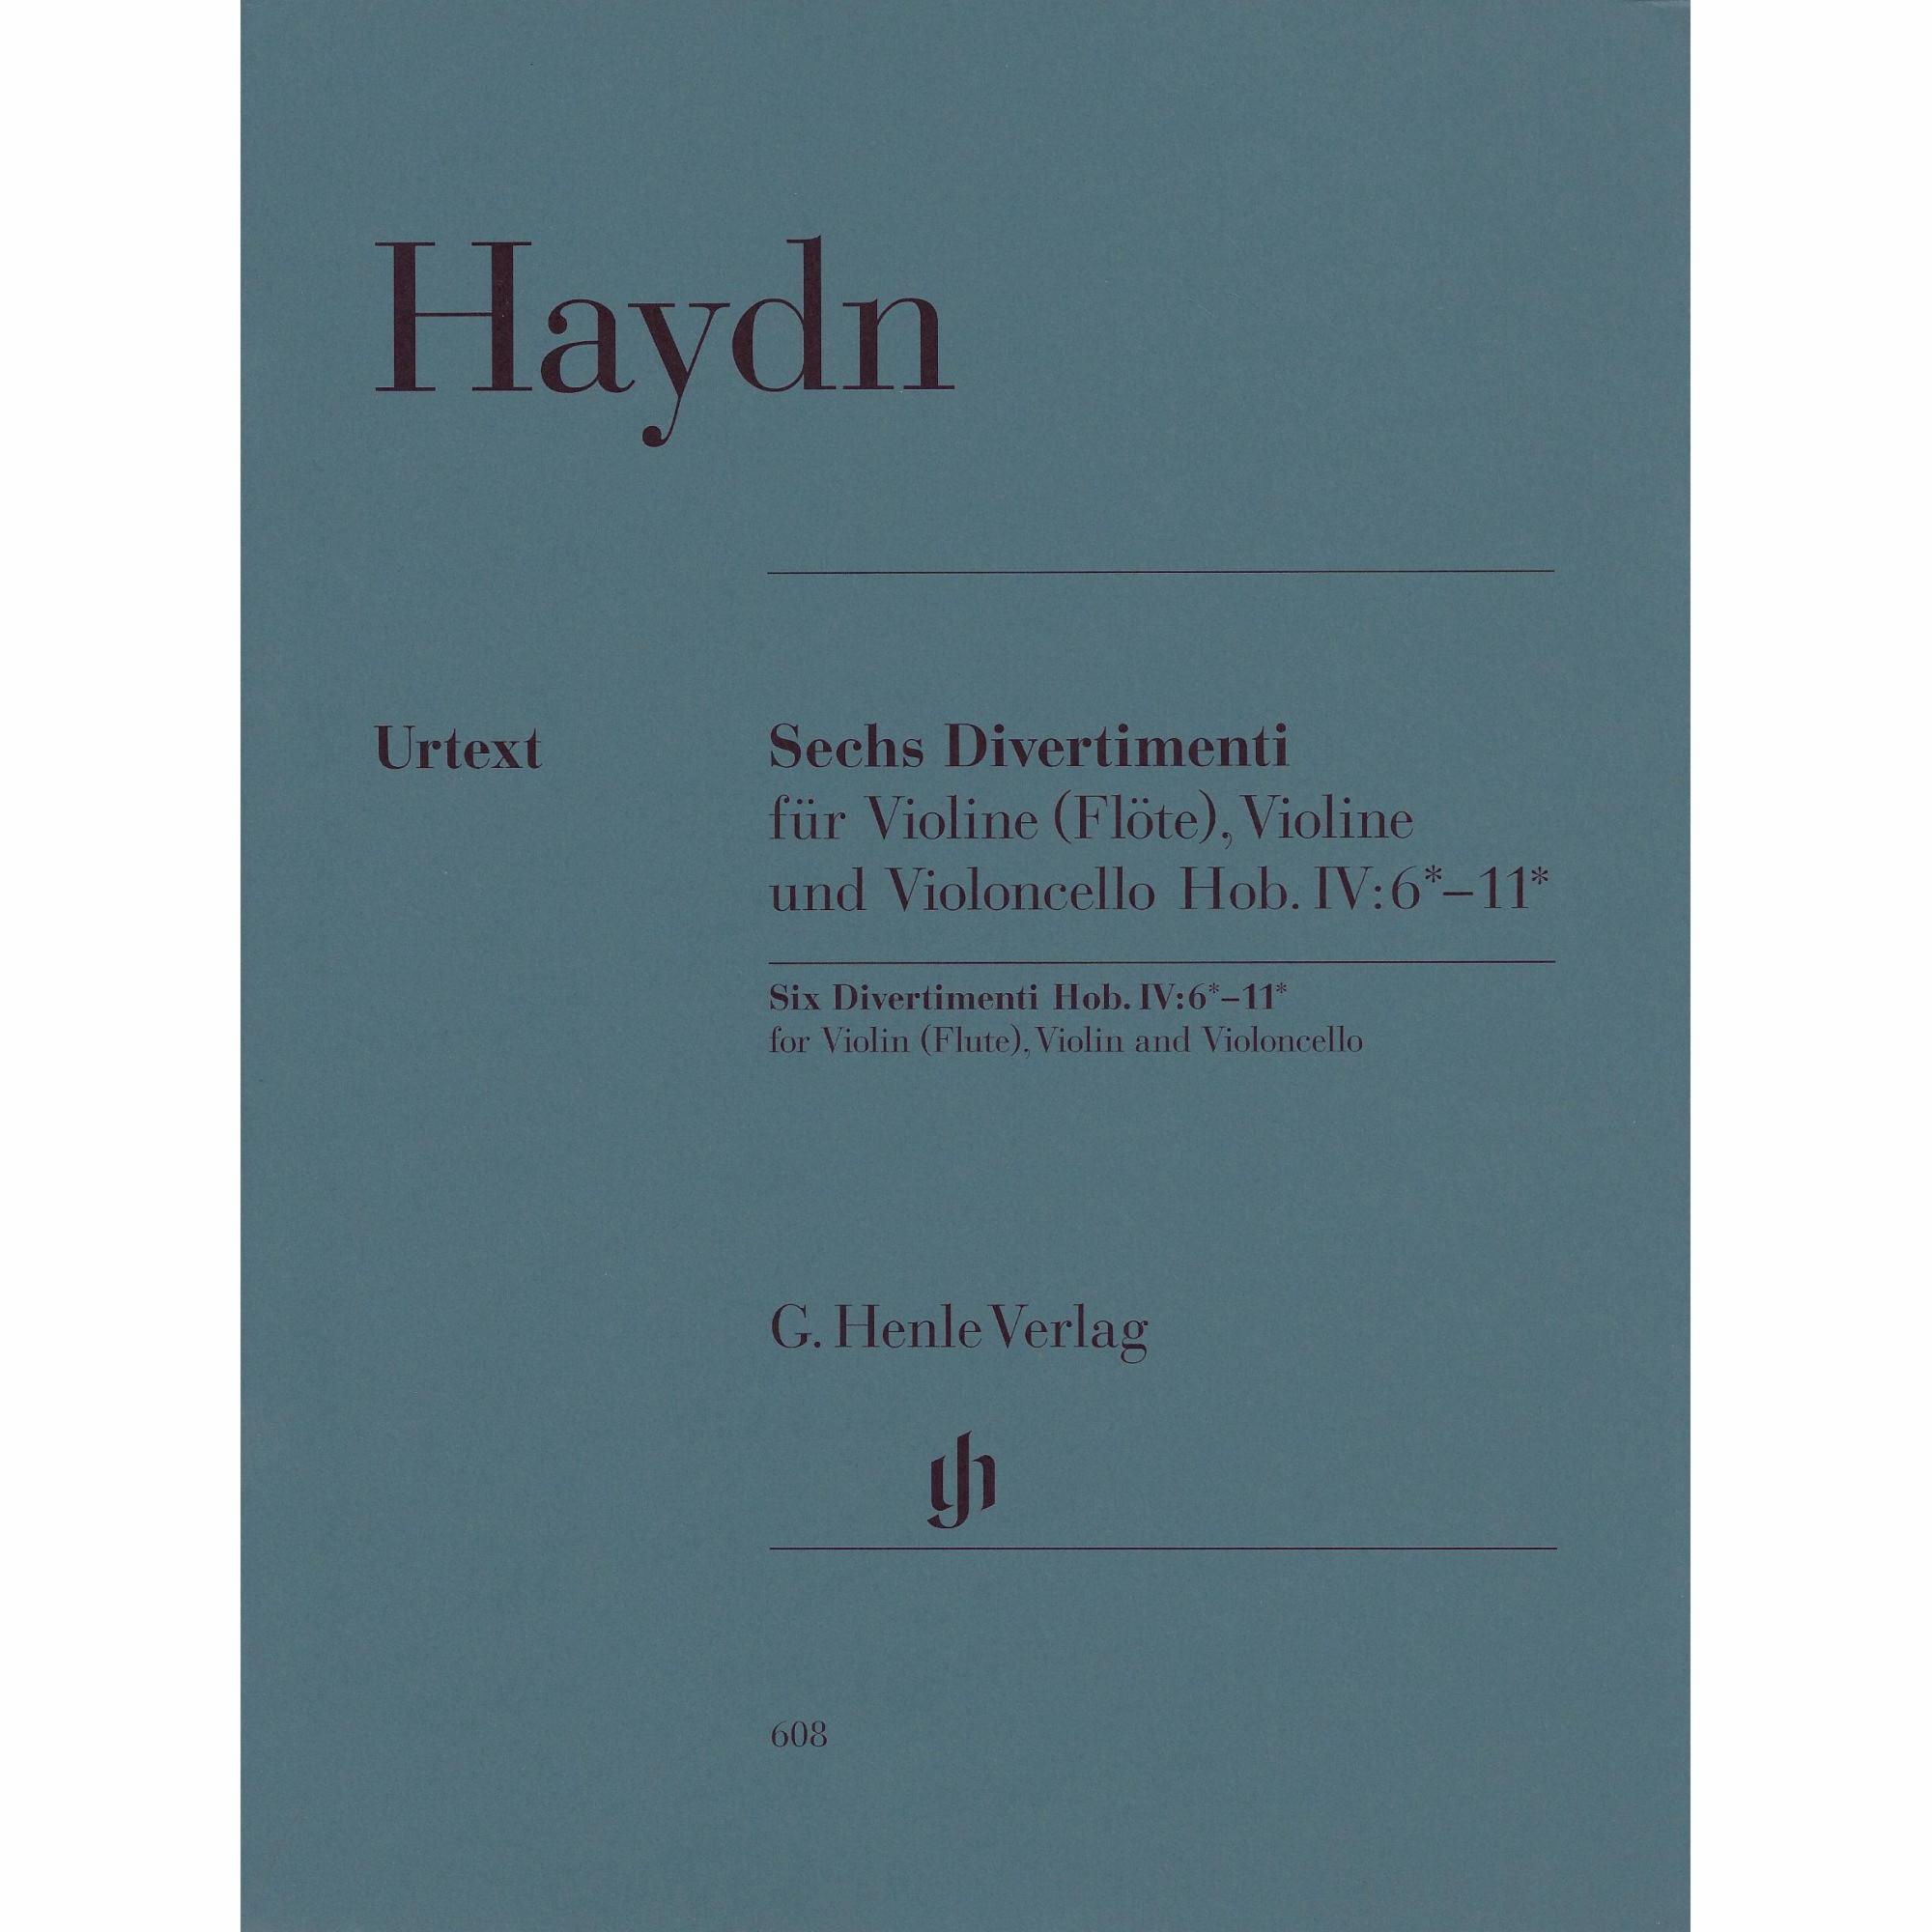 Haydn -- Six Divertimenti, Hob. IV:6*-11* for Two Violins and Cello